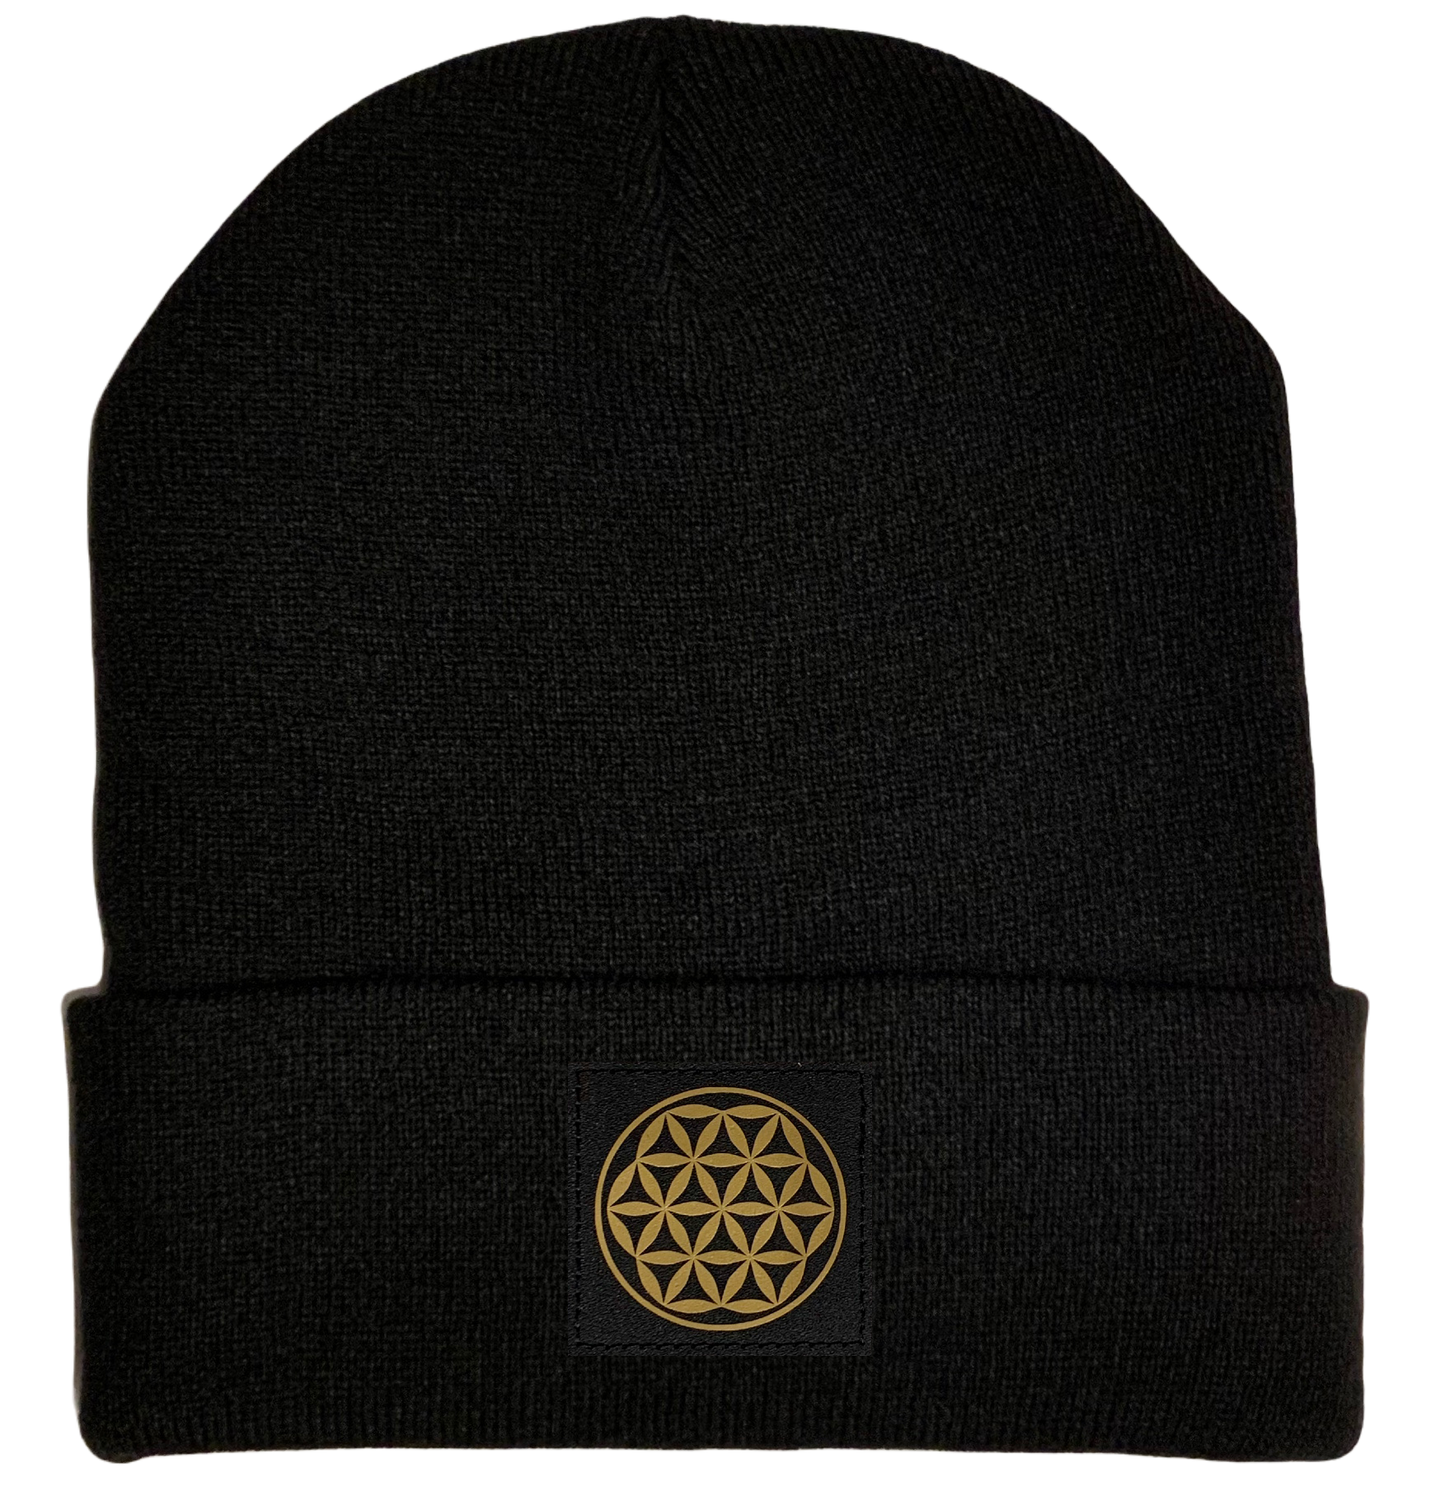 Beanie - Black Beanie with Black and Gold Vegan Leather Flower of Life Symbol over your Third Eye